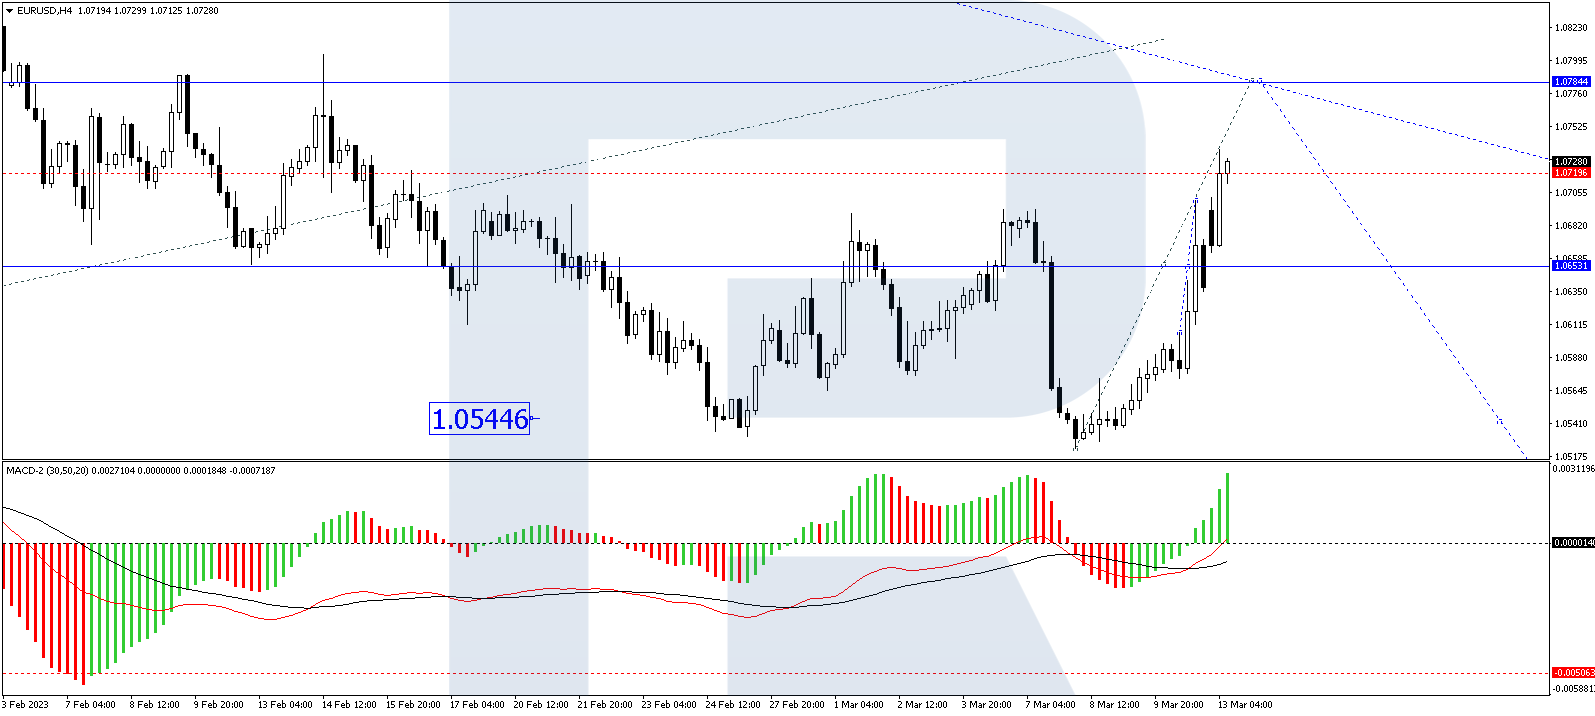 On the H4 EUR/USD chart a retracement pattern is forming towards 1.0784